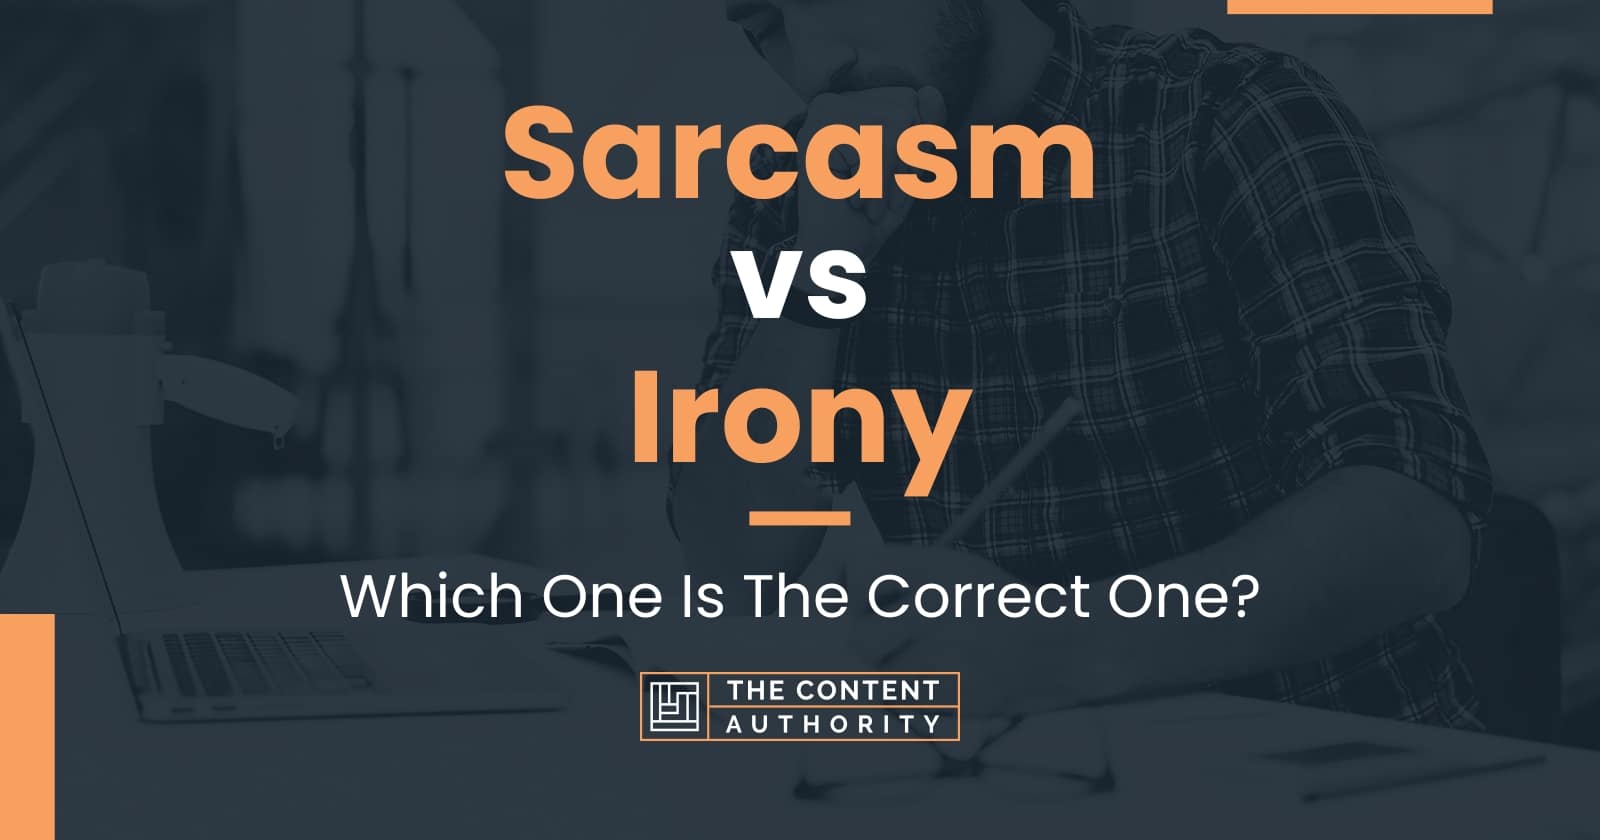 Sarcasm Vs Irony Which One Is The Correct One